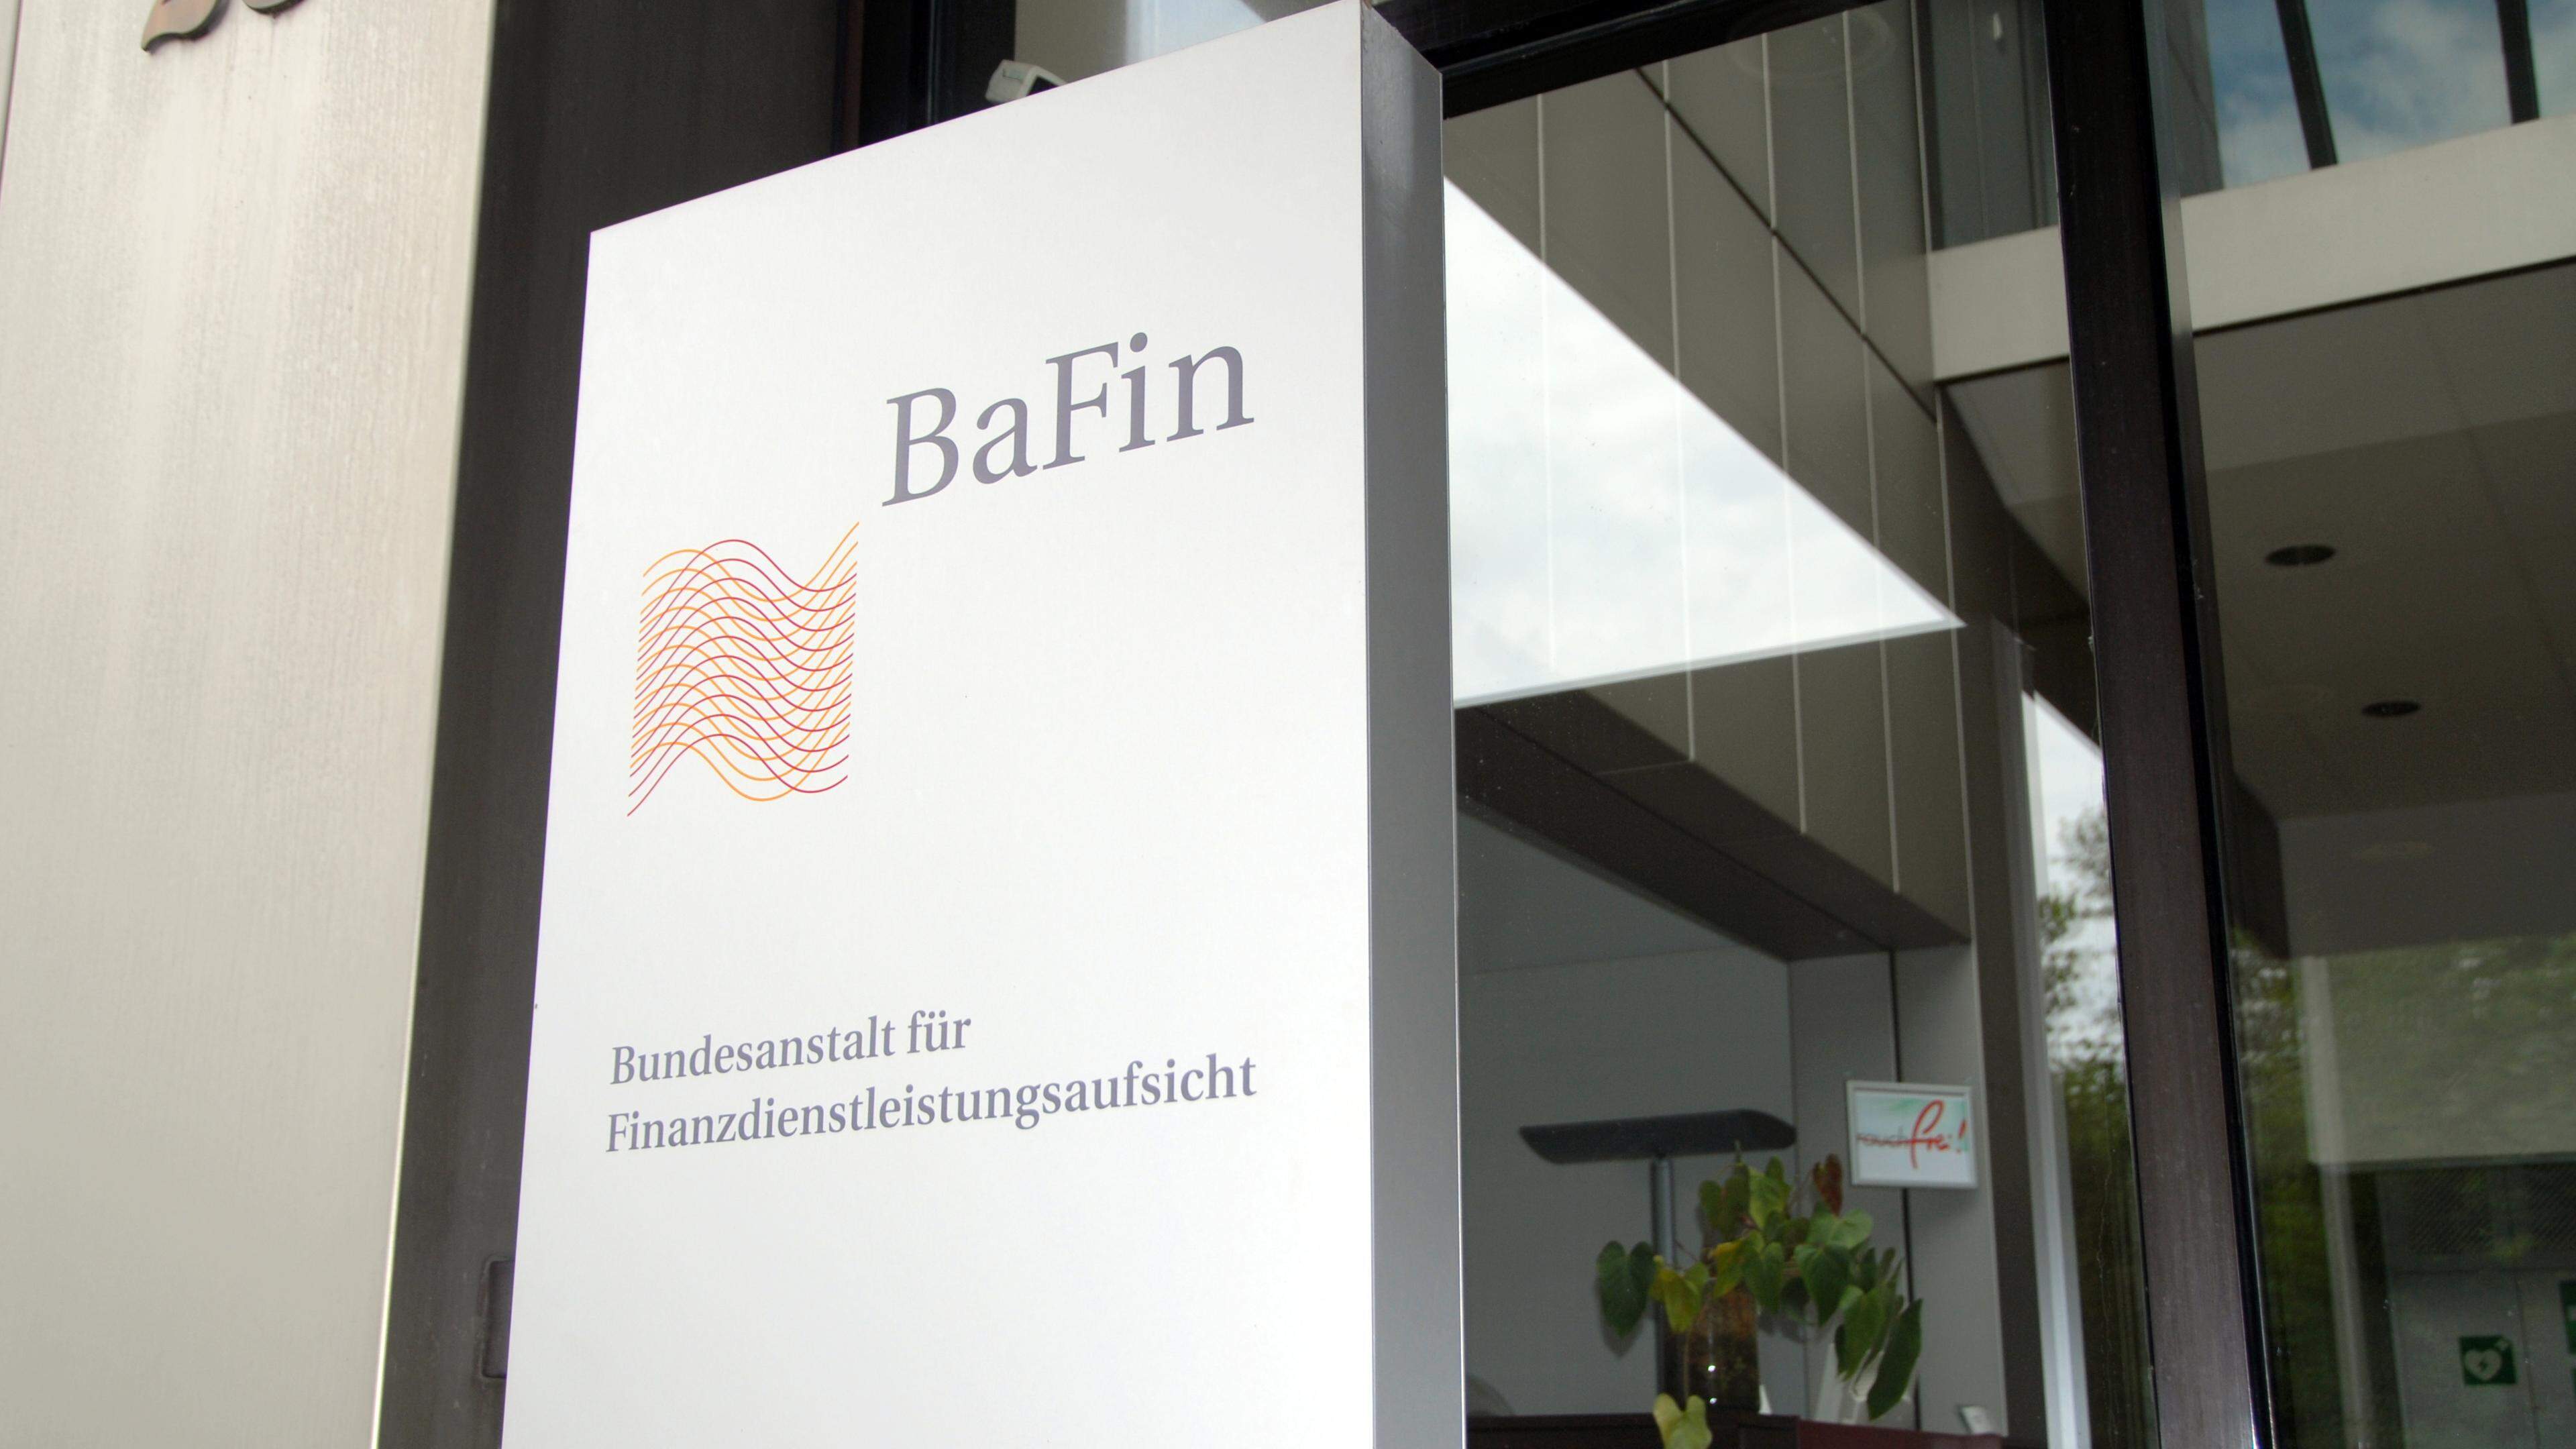 BaFin, Germany’s financial regulator, has been cracking down on fintechs for years